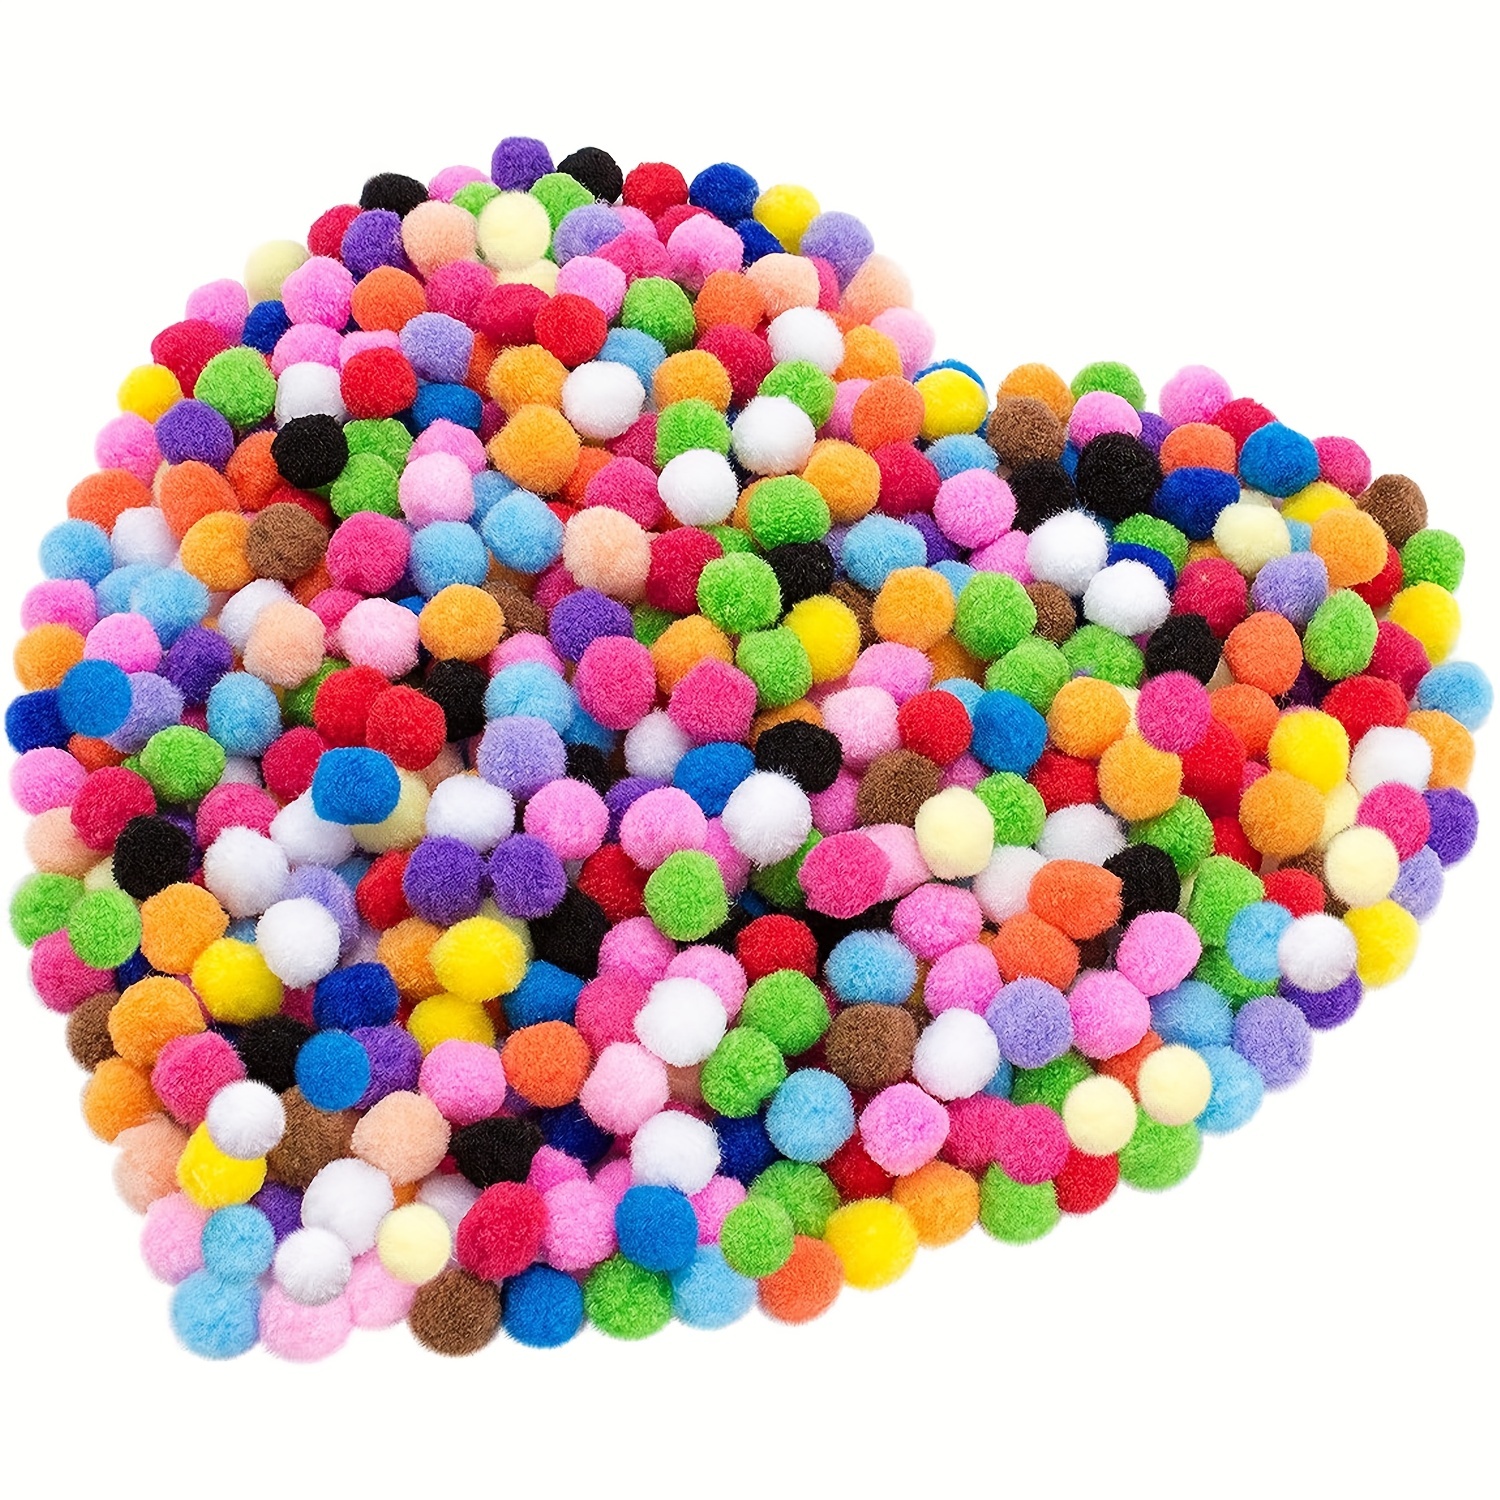 

1200pcs Pom Pom Arts And Crafts - Colorful Assortment Of Pom Poms For Crafts Diy Projects Family Gatherings Holiday Ideas Decorations Eid Al-adha Mubarak